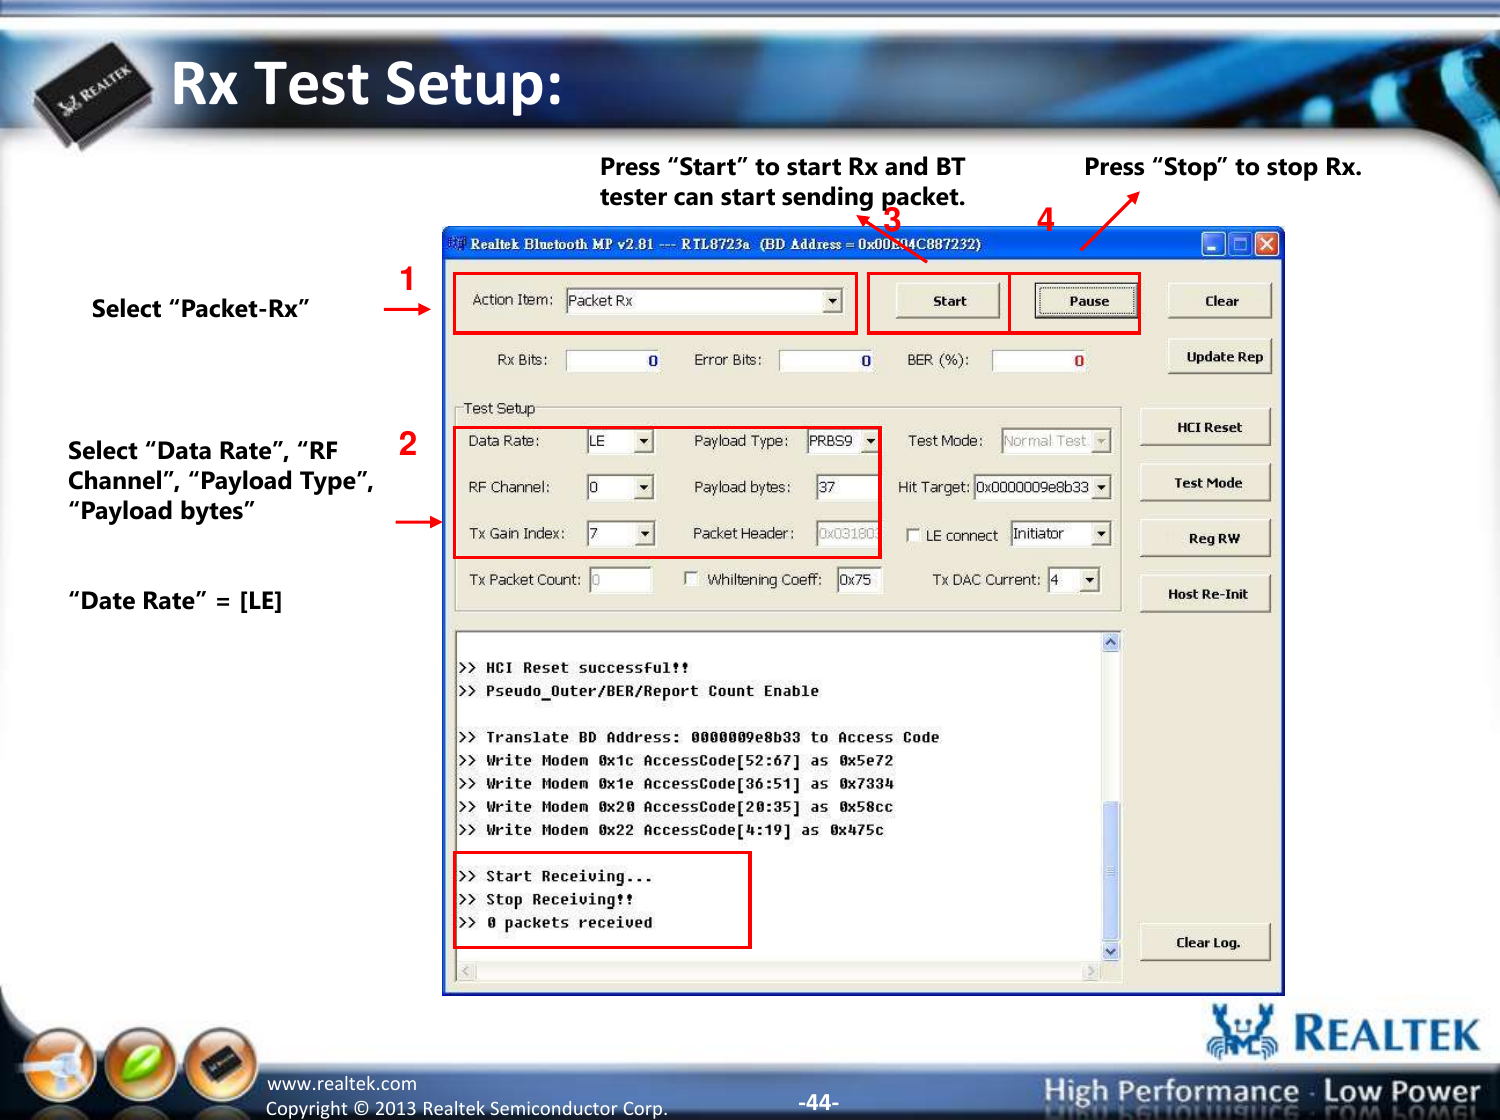 -44- Copyright ©  2013 Realtek Semiconductor Corp. www.realtek.com Rx Test Setup: Select “Packet-Rx” 1 2 3 Select “Data Rate”, “RF Channel”, “Payload Type”, “Payload bytes”  “Date Rate” = [LE] Press “Start” to start Rx and BT tester can start sending packet.  4 Press “Stop” to stop Rx. 